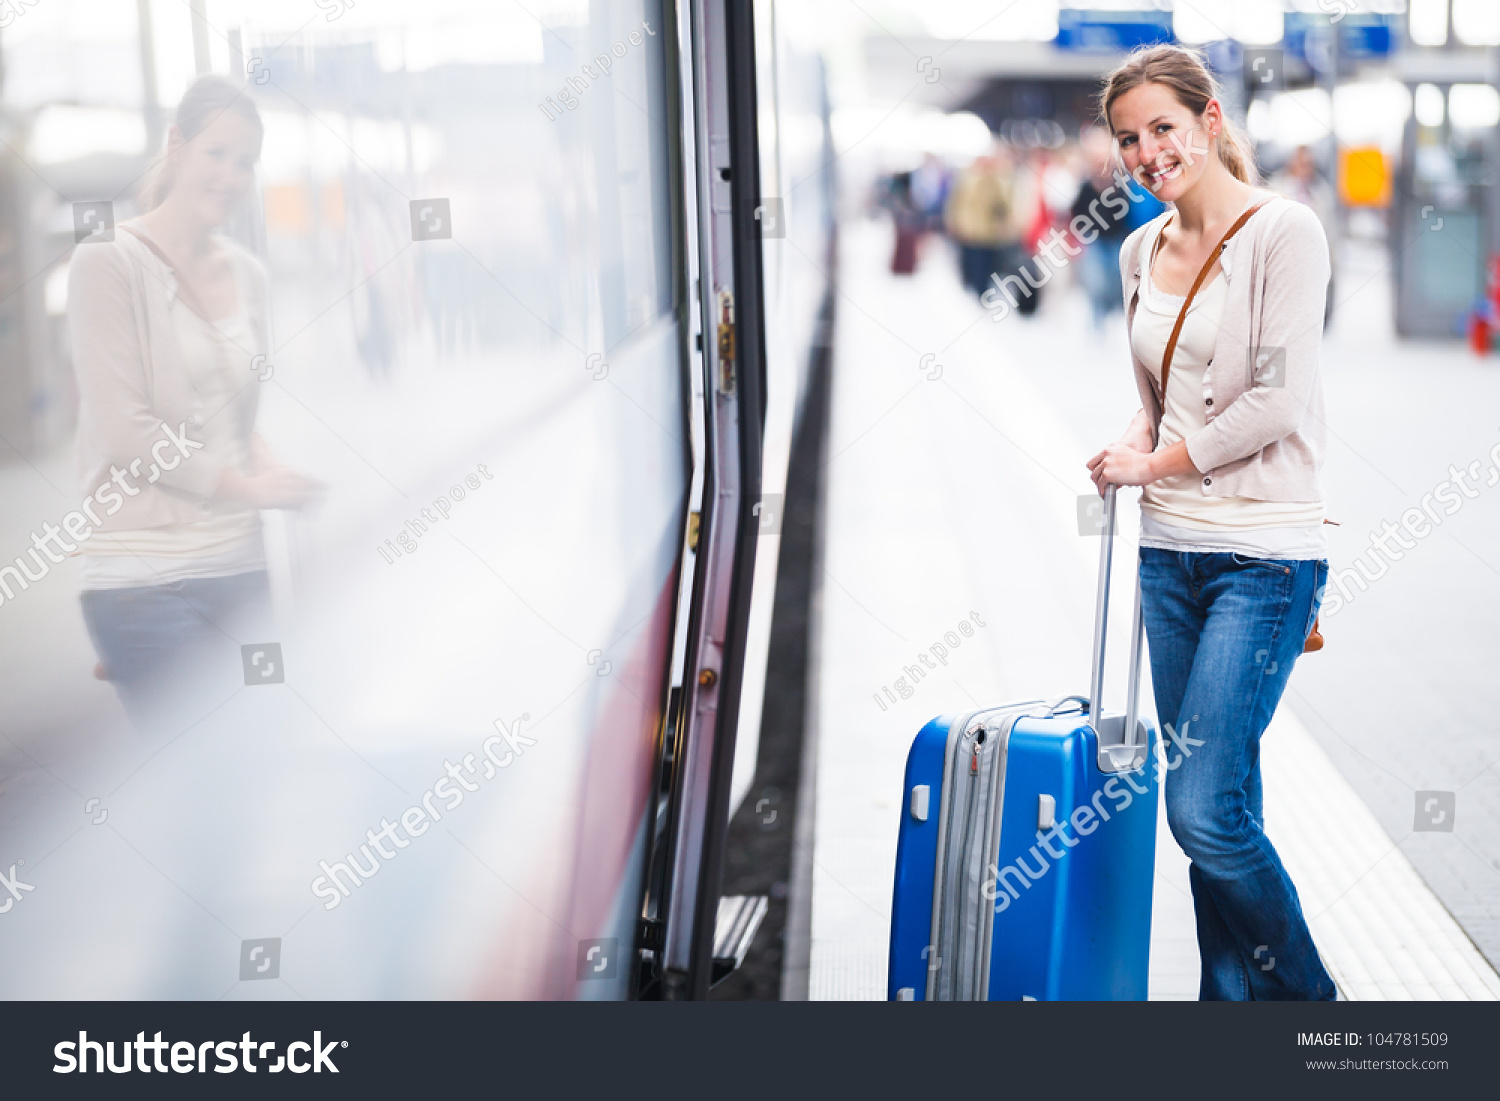 Pretty young woman boarding a train (color toned image) #104781509